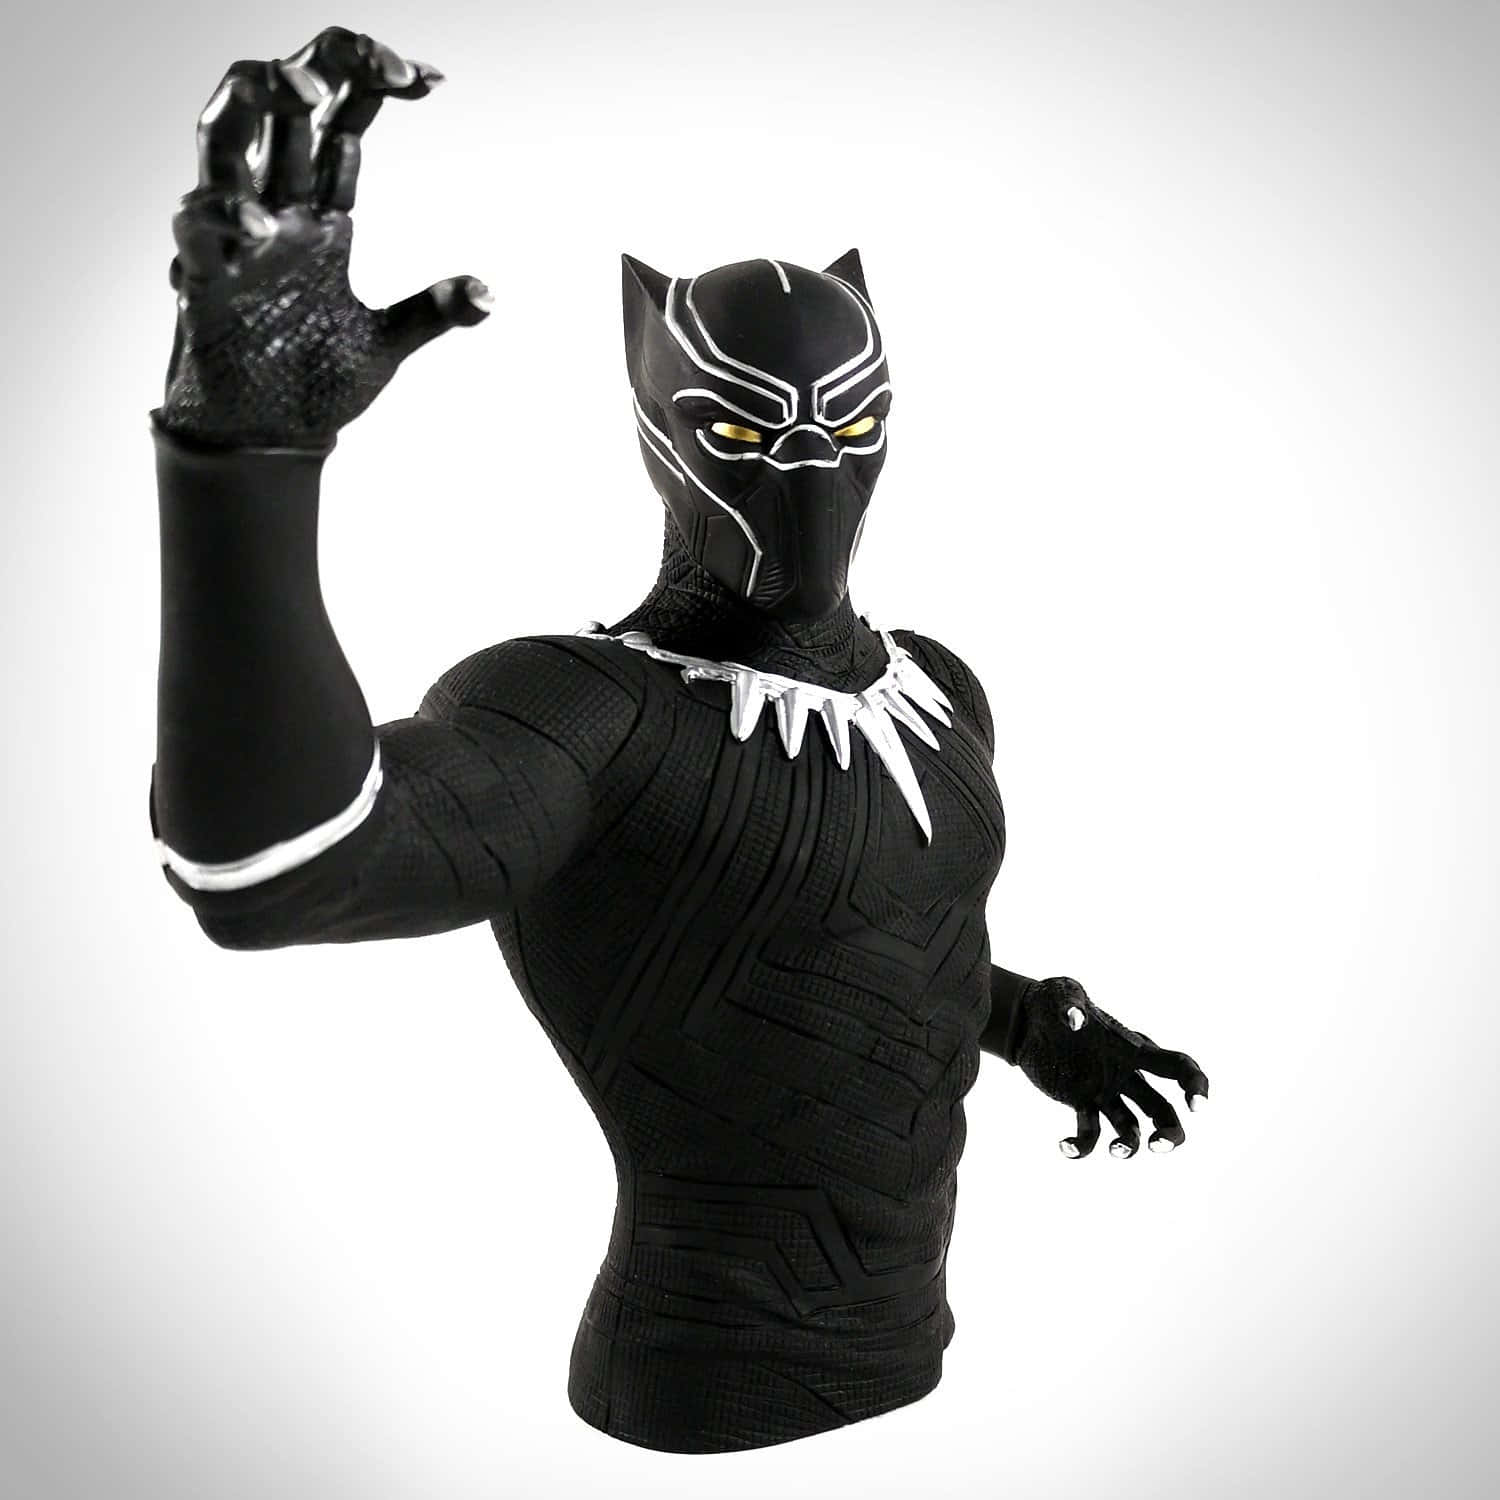 Majestic Black Panther with Unsheathed Claws Wallpaper